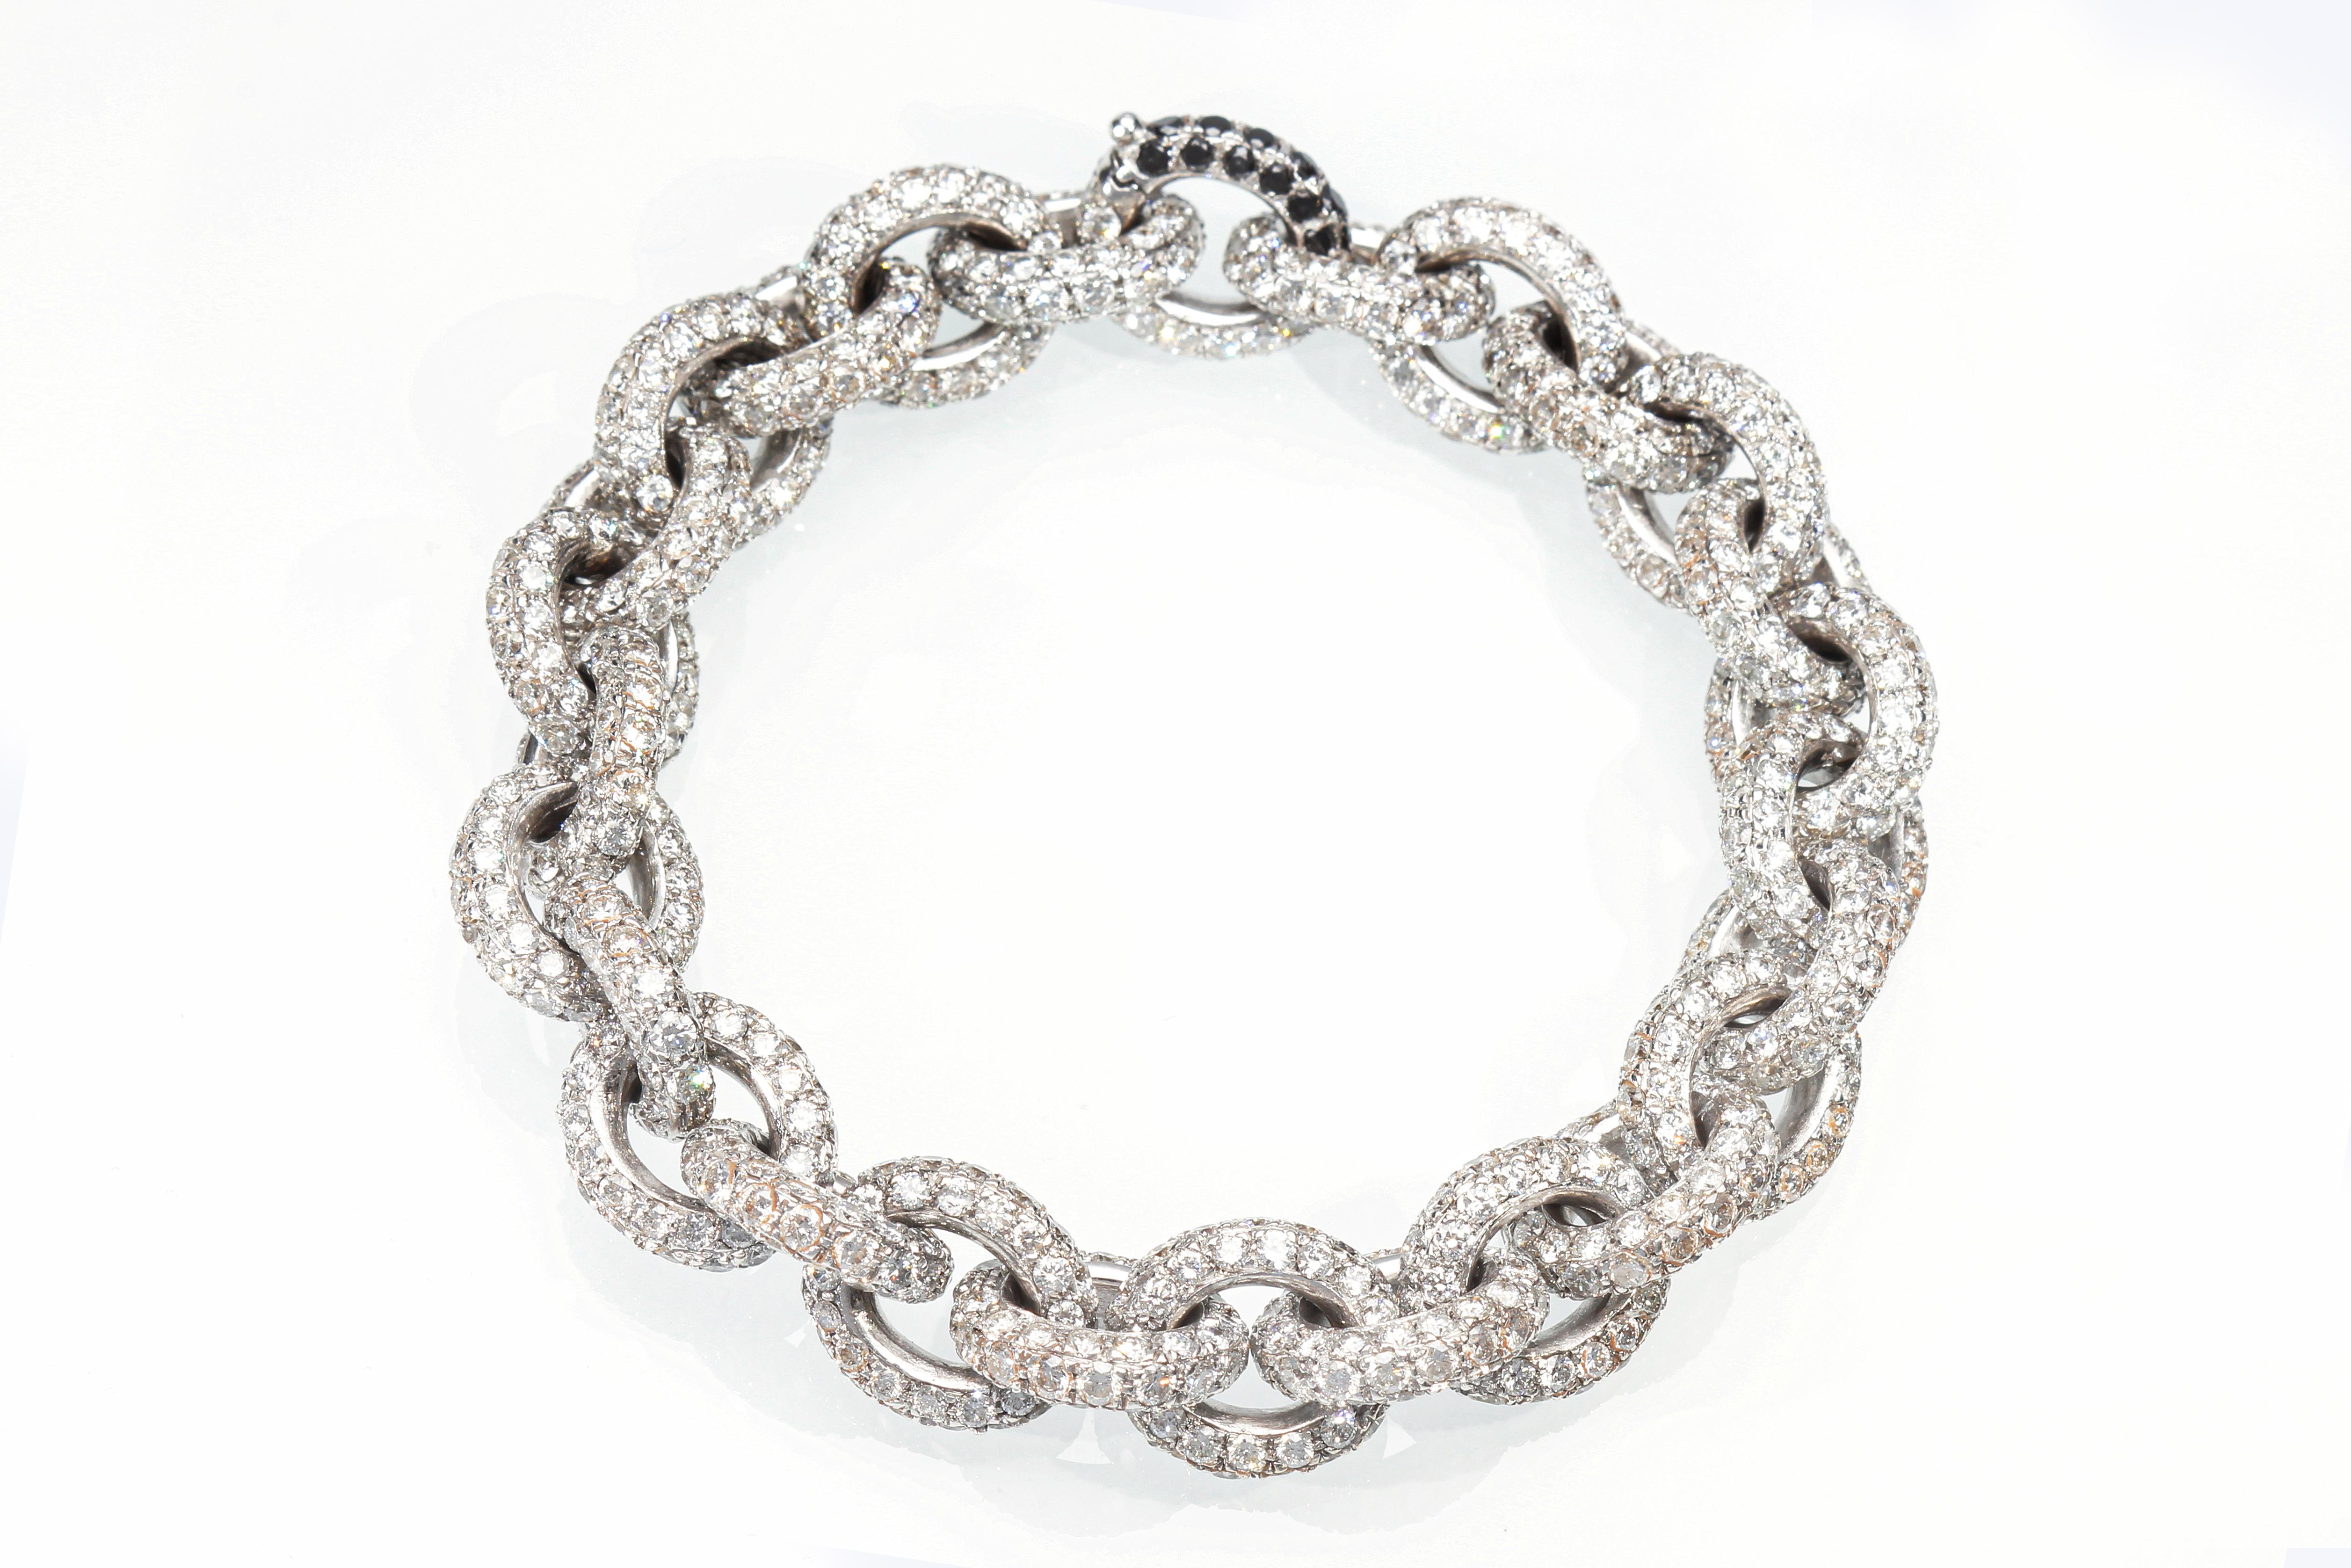 Modern Chain Necklace/Bracelet with 64.26 Ct of White and Black Diamonds. Handmade. For Sale